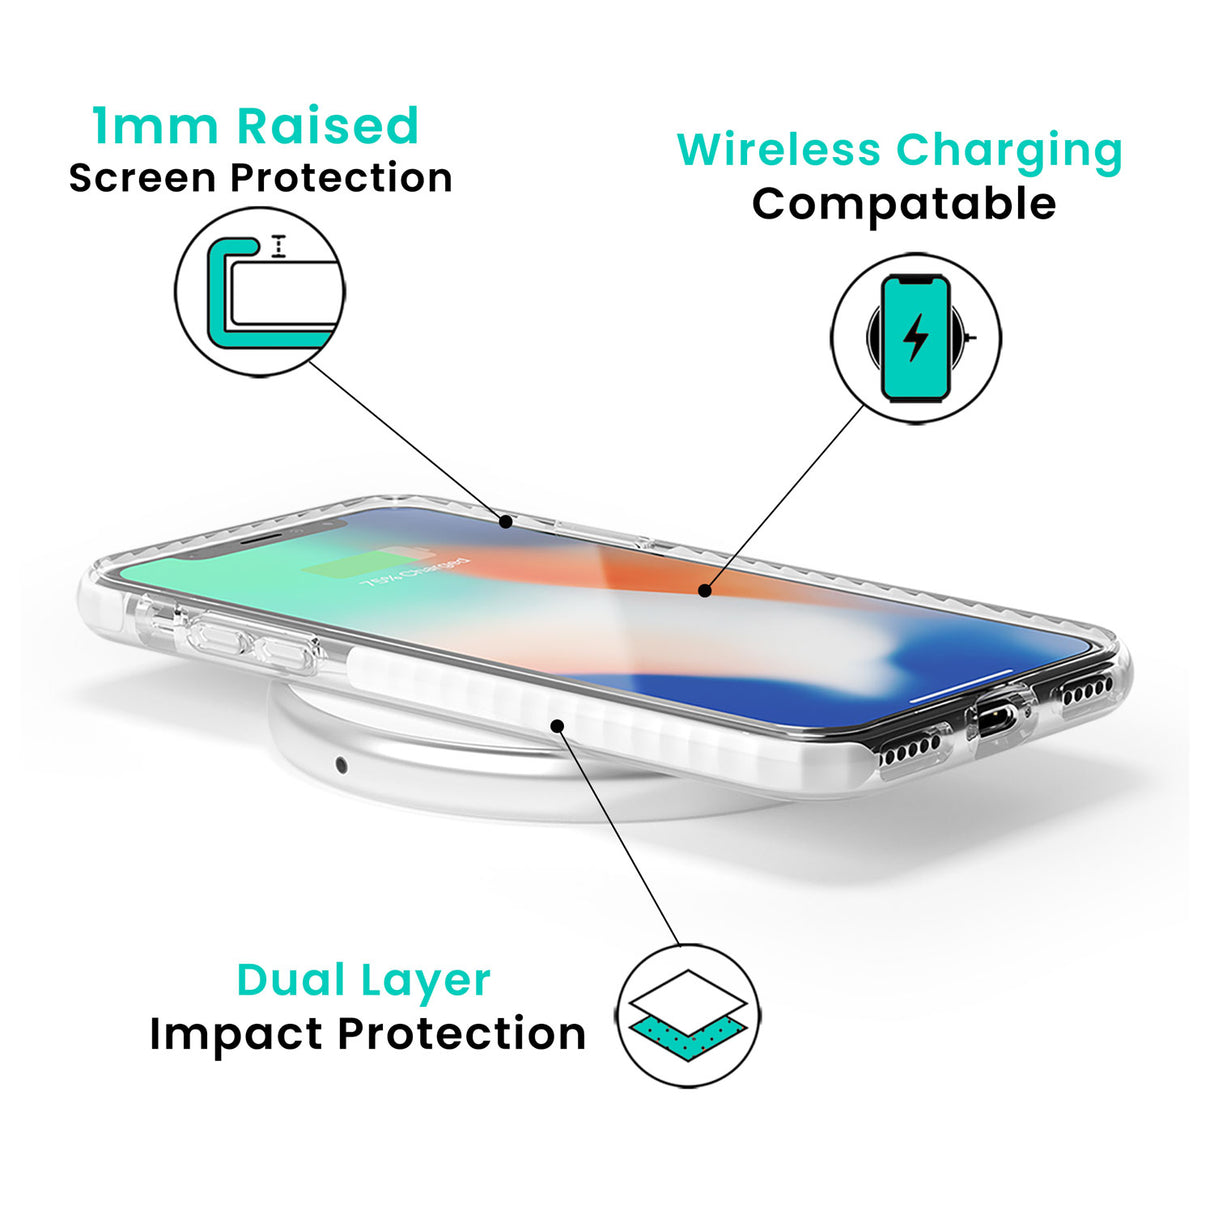 Clear My HeadspaceImpact Phone Case for iPhone SE